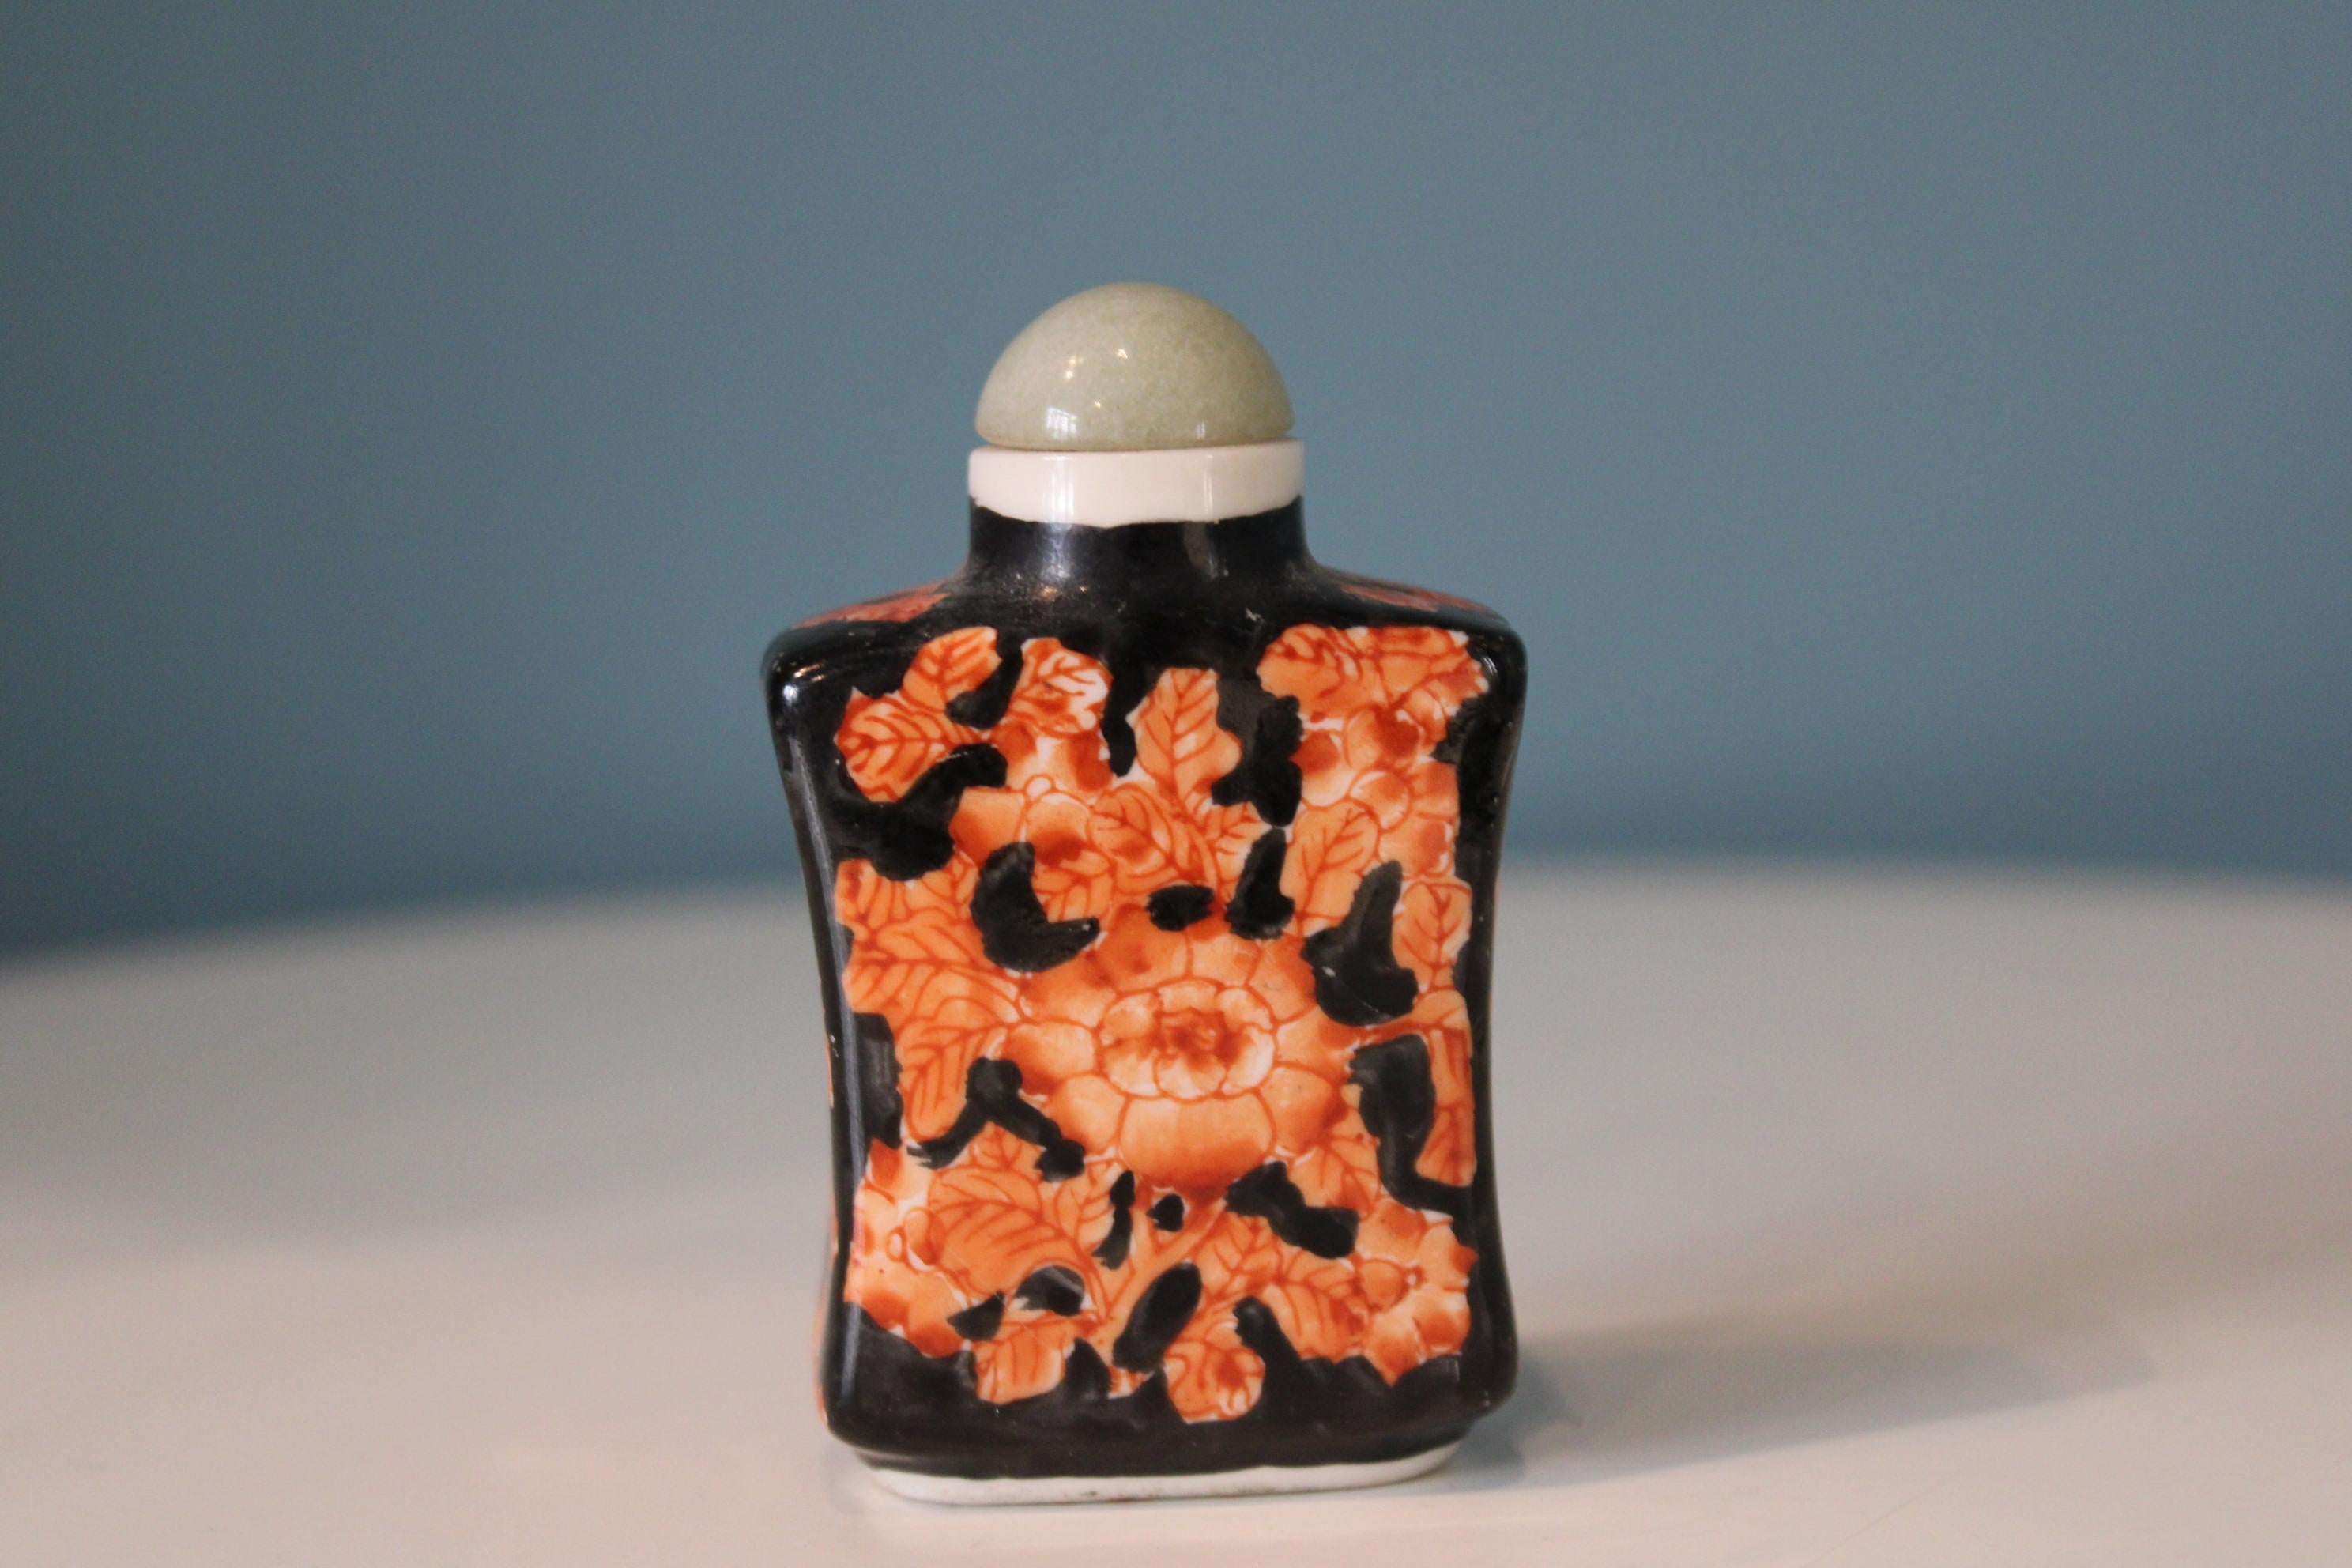 Porcelain Chinese Snuff bottle.